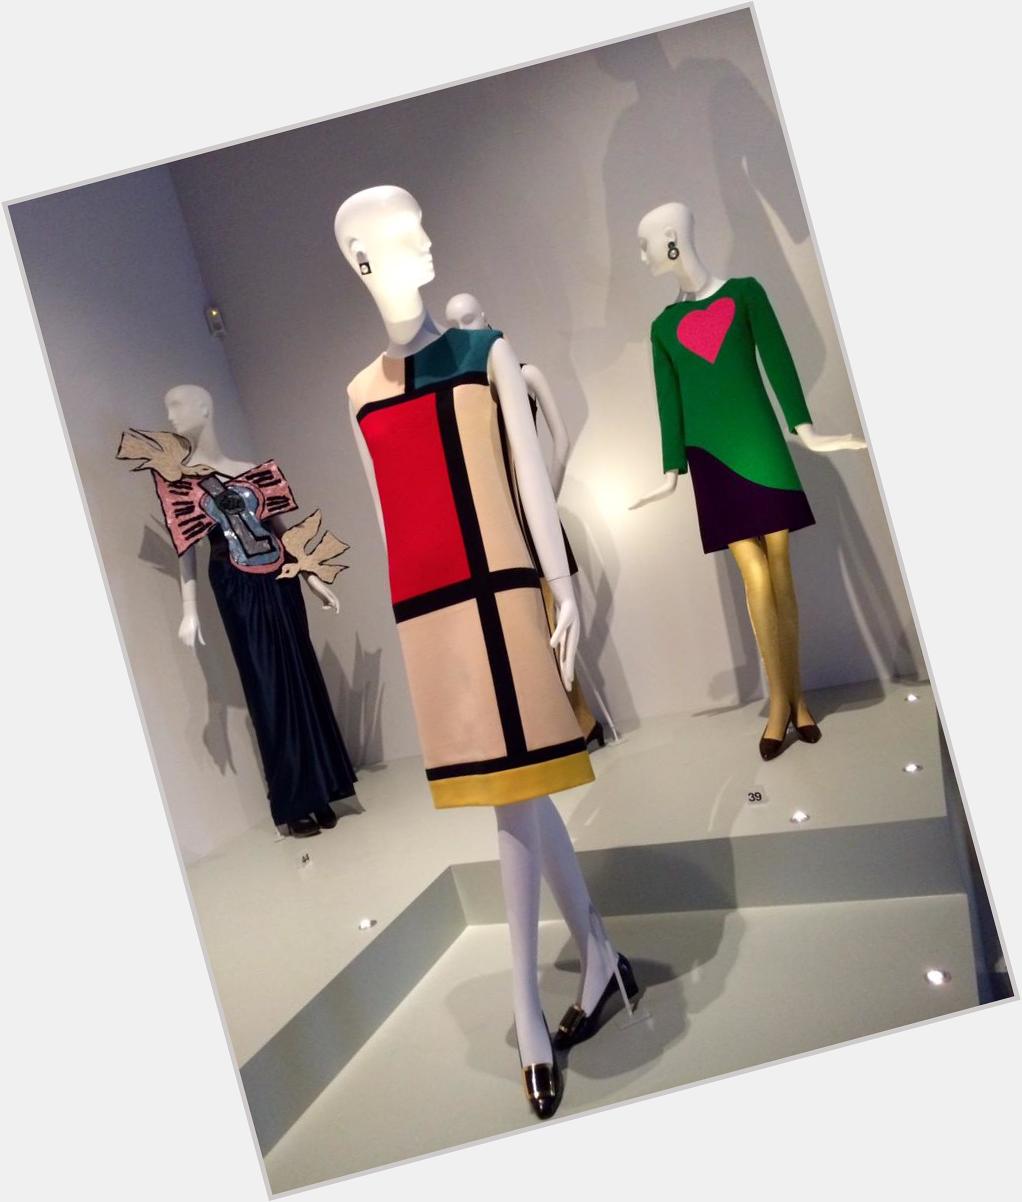 Happy Birthday Yves Saint Laurent...born on this day 1936! Have you seen the \Style is Eternal\ exhibition yet? 